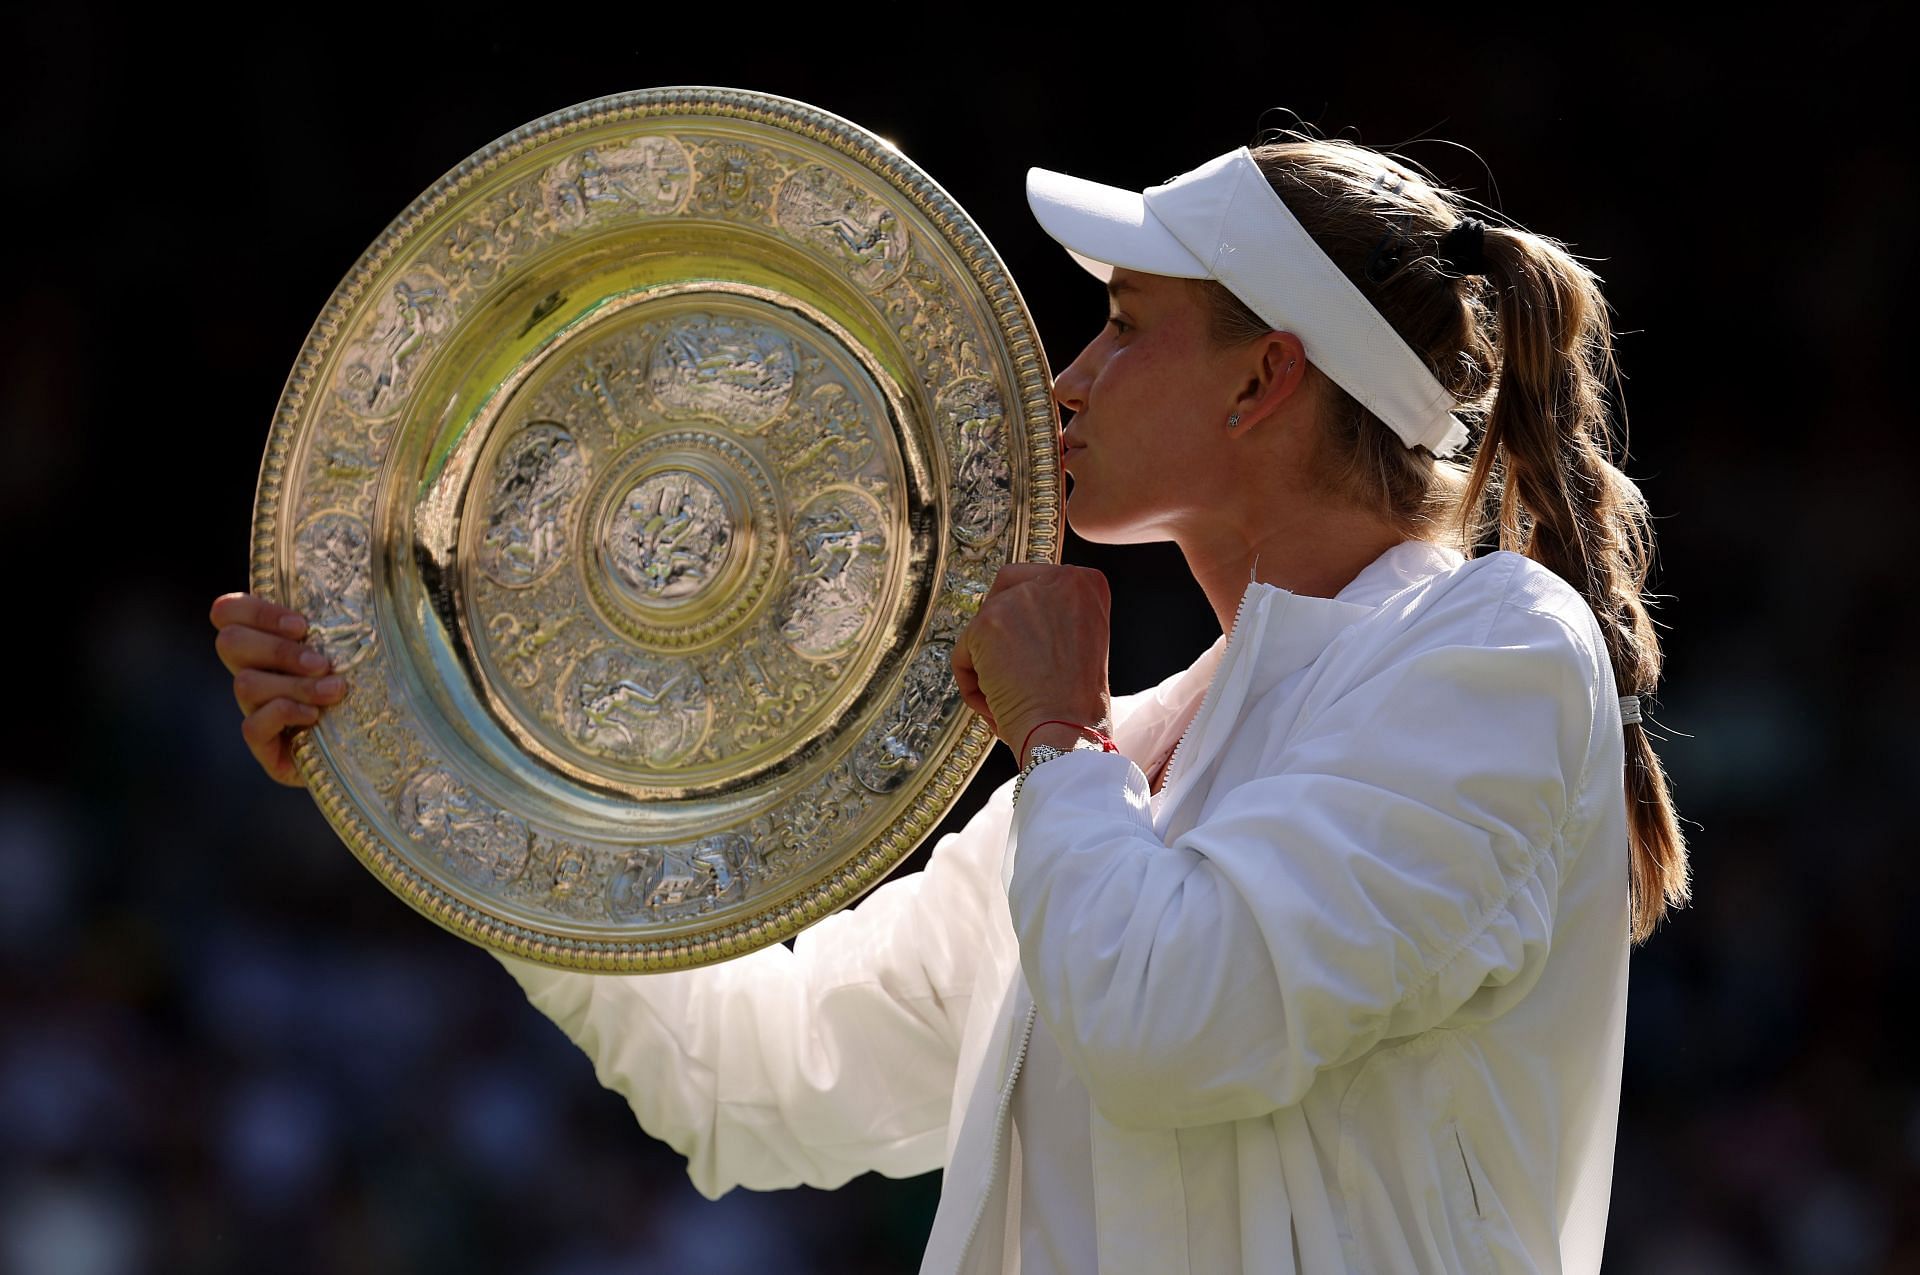 Elena Rybakina won her maiden Grand Slam title by beating Ons Jabeur in the Wimbledon final